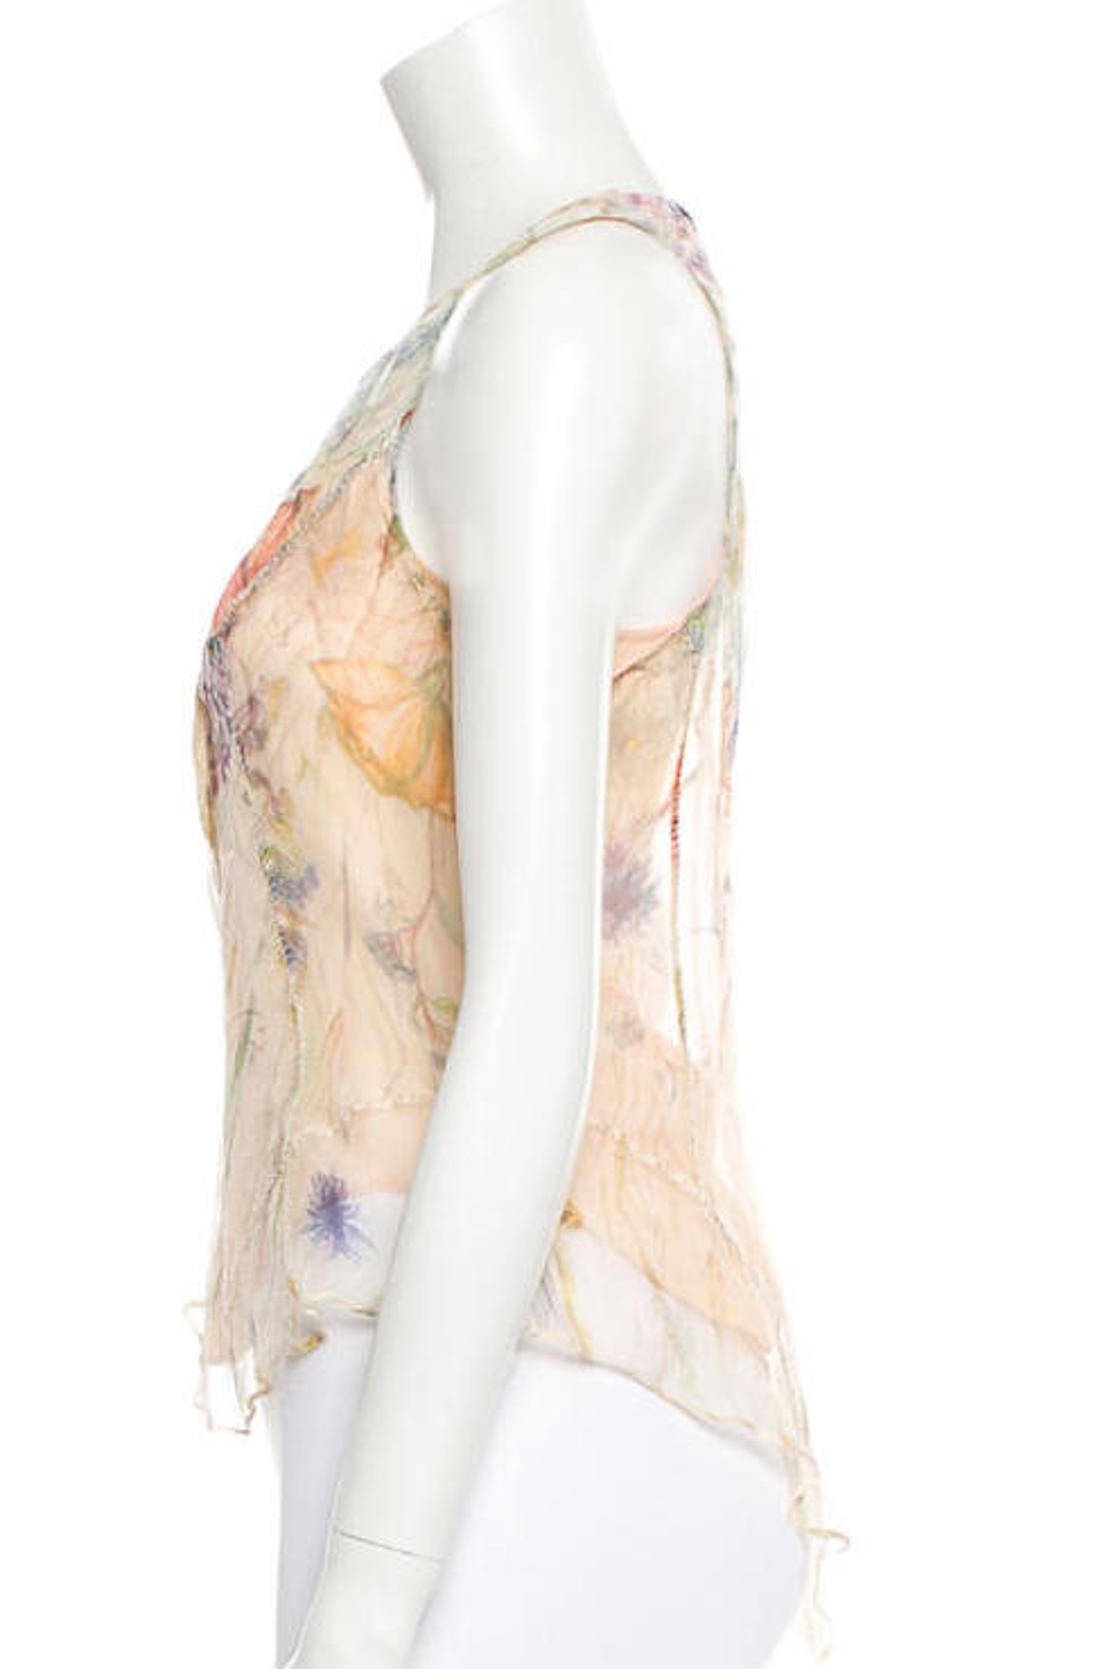 Alexander McQueen semi-sheer pink floral print sleeveless blouse with sheer underlay. The blouse features button details at bust, a peach camisole to wear under the blouse, and exterior stitching accents.

Measurements: bust 34